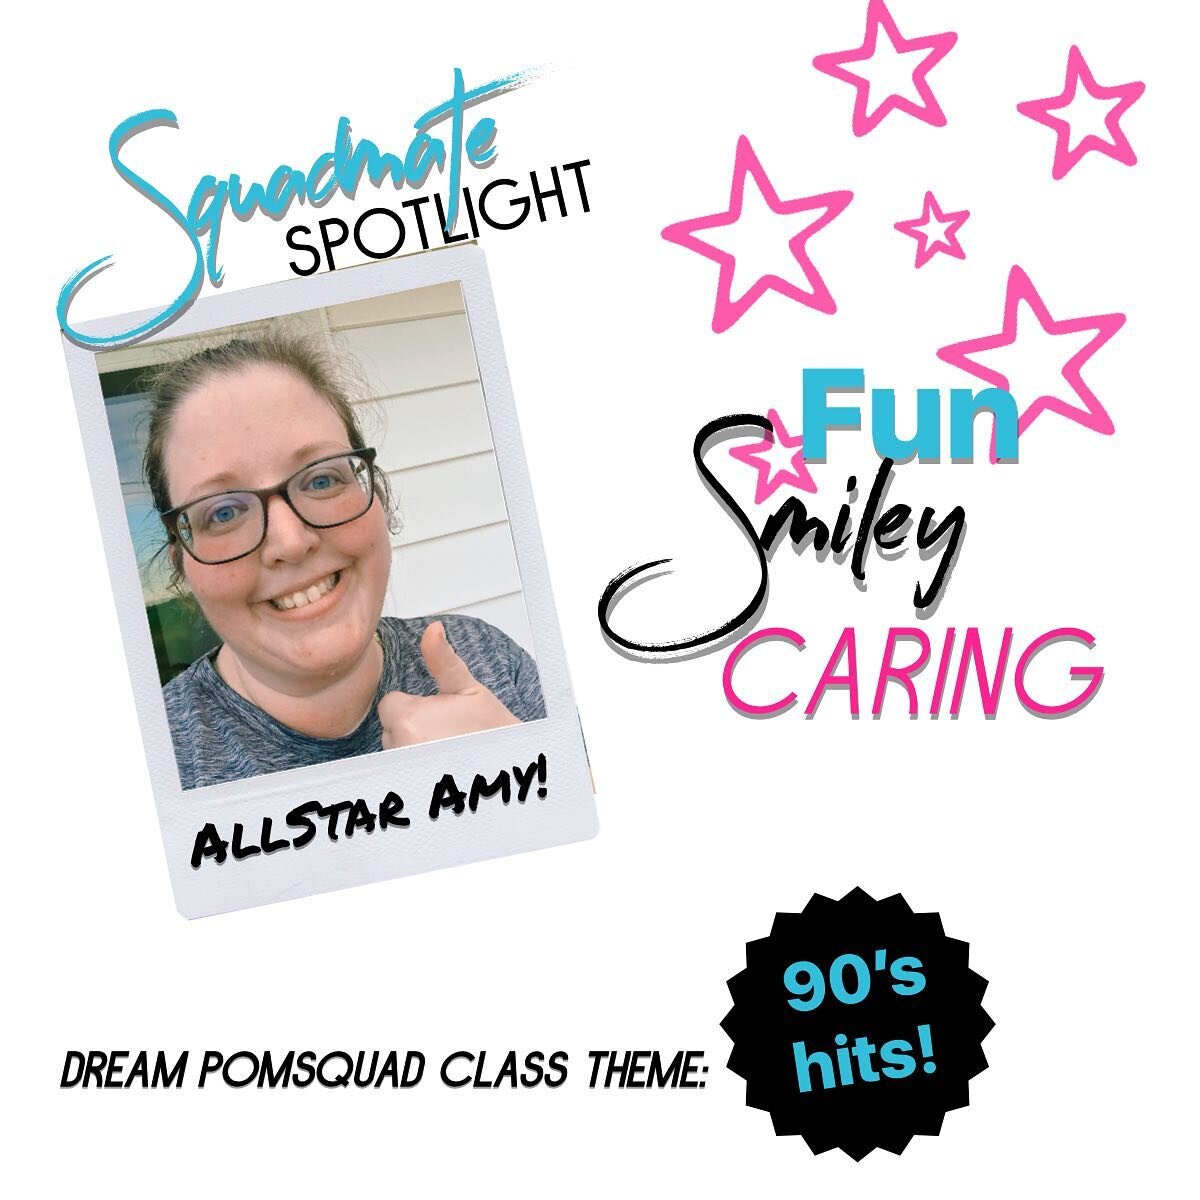 It&rsquo;s #SquadmateSpotlight time! Introducing ⭐️AllStar Amy⭐️ Amy was nominated by Captain Susie Q because &lsquo;she always arrives with a smile, dedicated to class and radiates positive energy&rsquo; 🥰🥰 Well that seems very apparent by these s